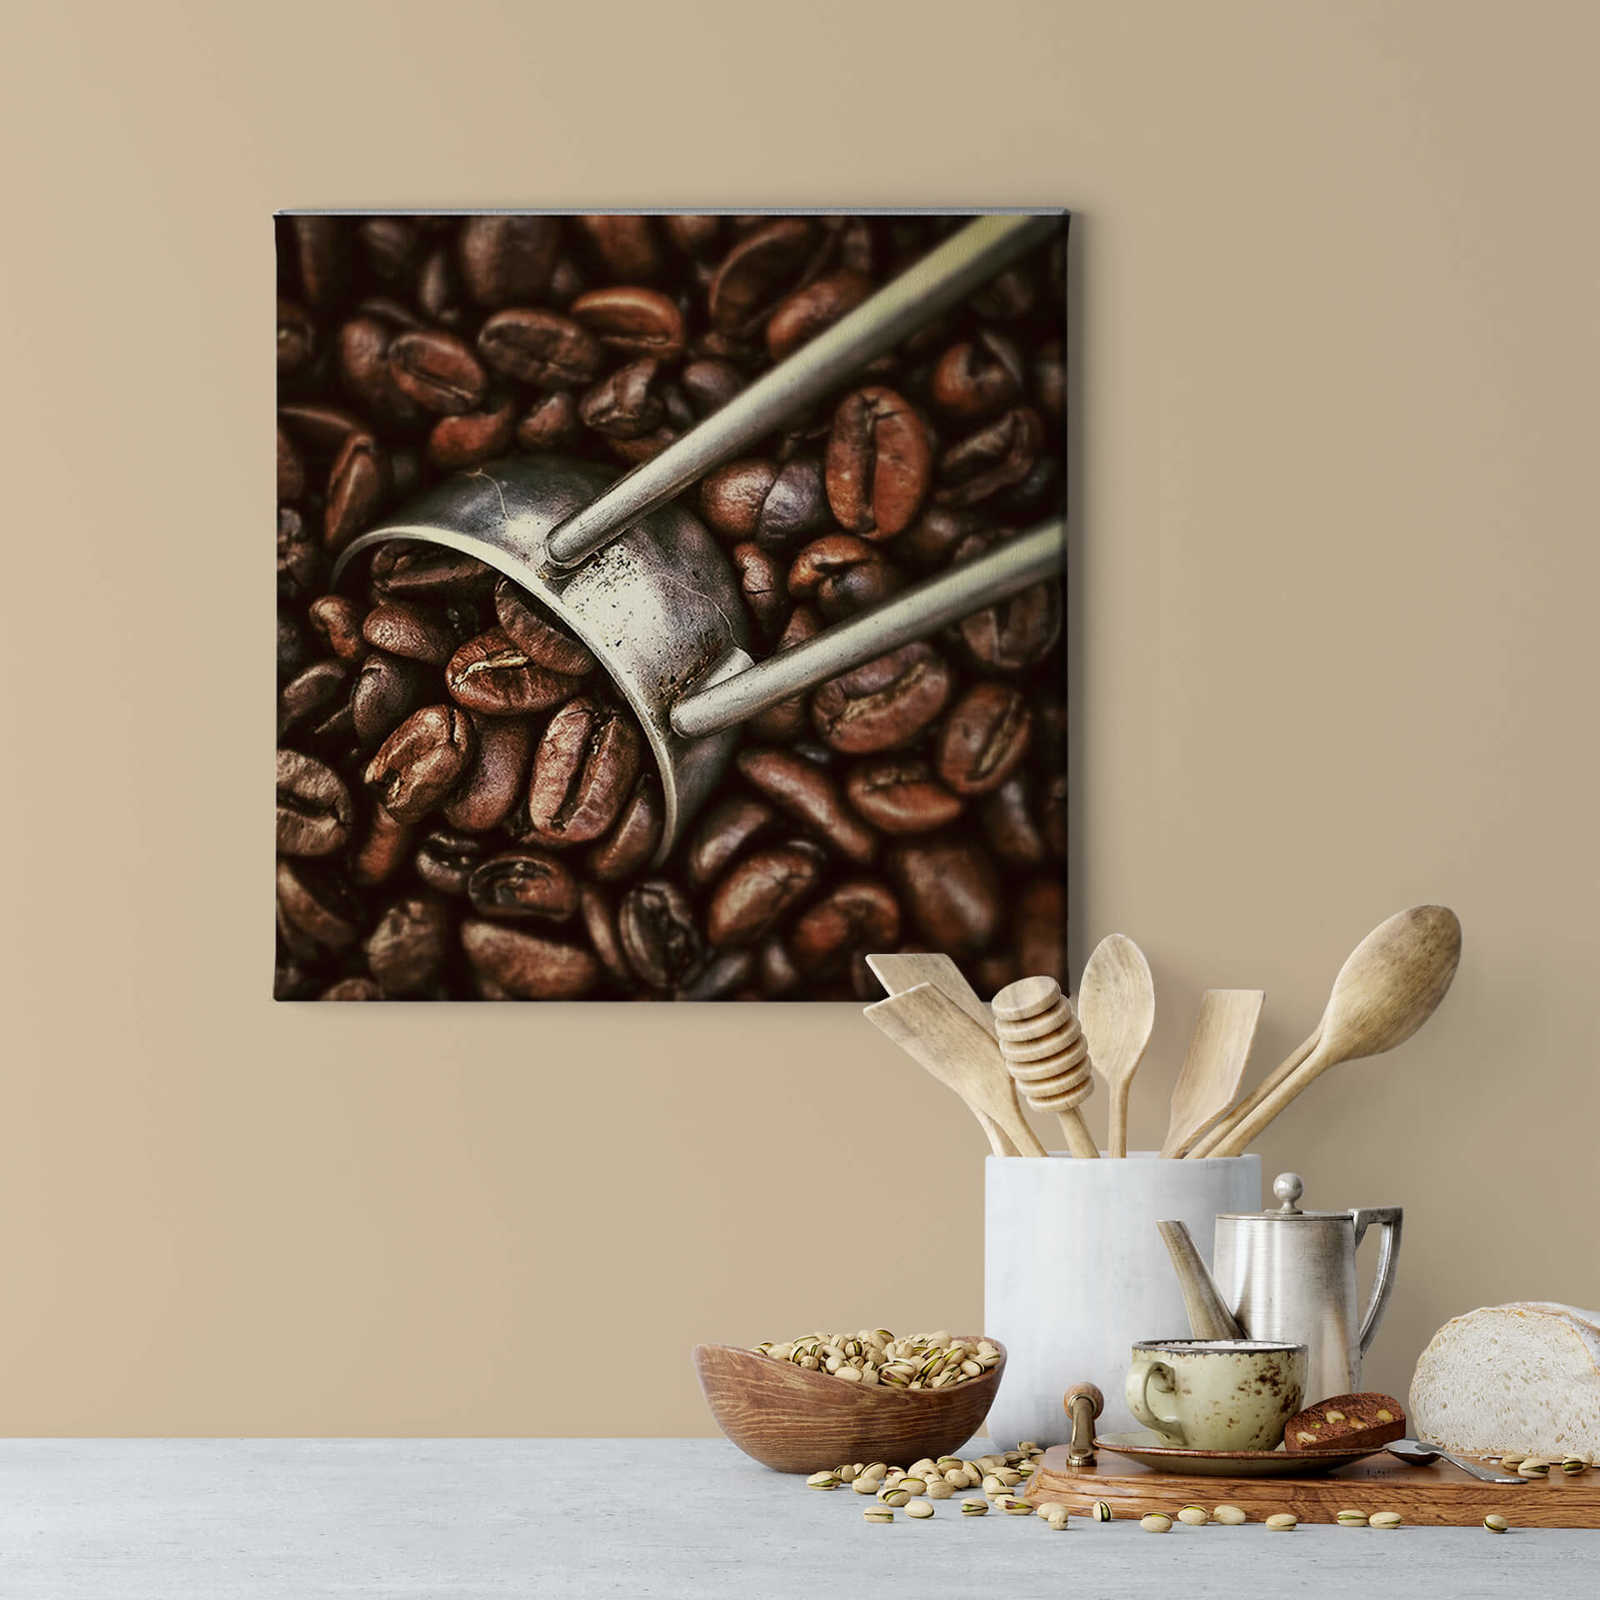             Square canvas picture coffee beans – brown
        